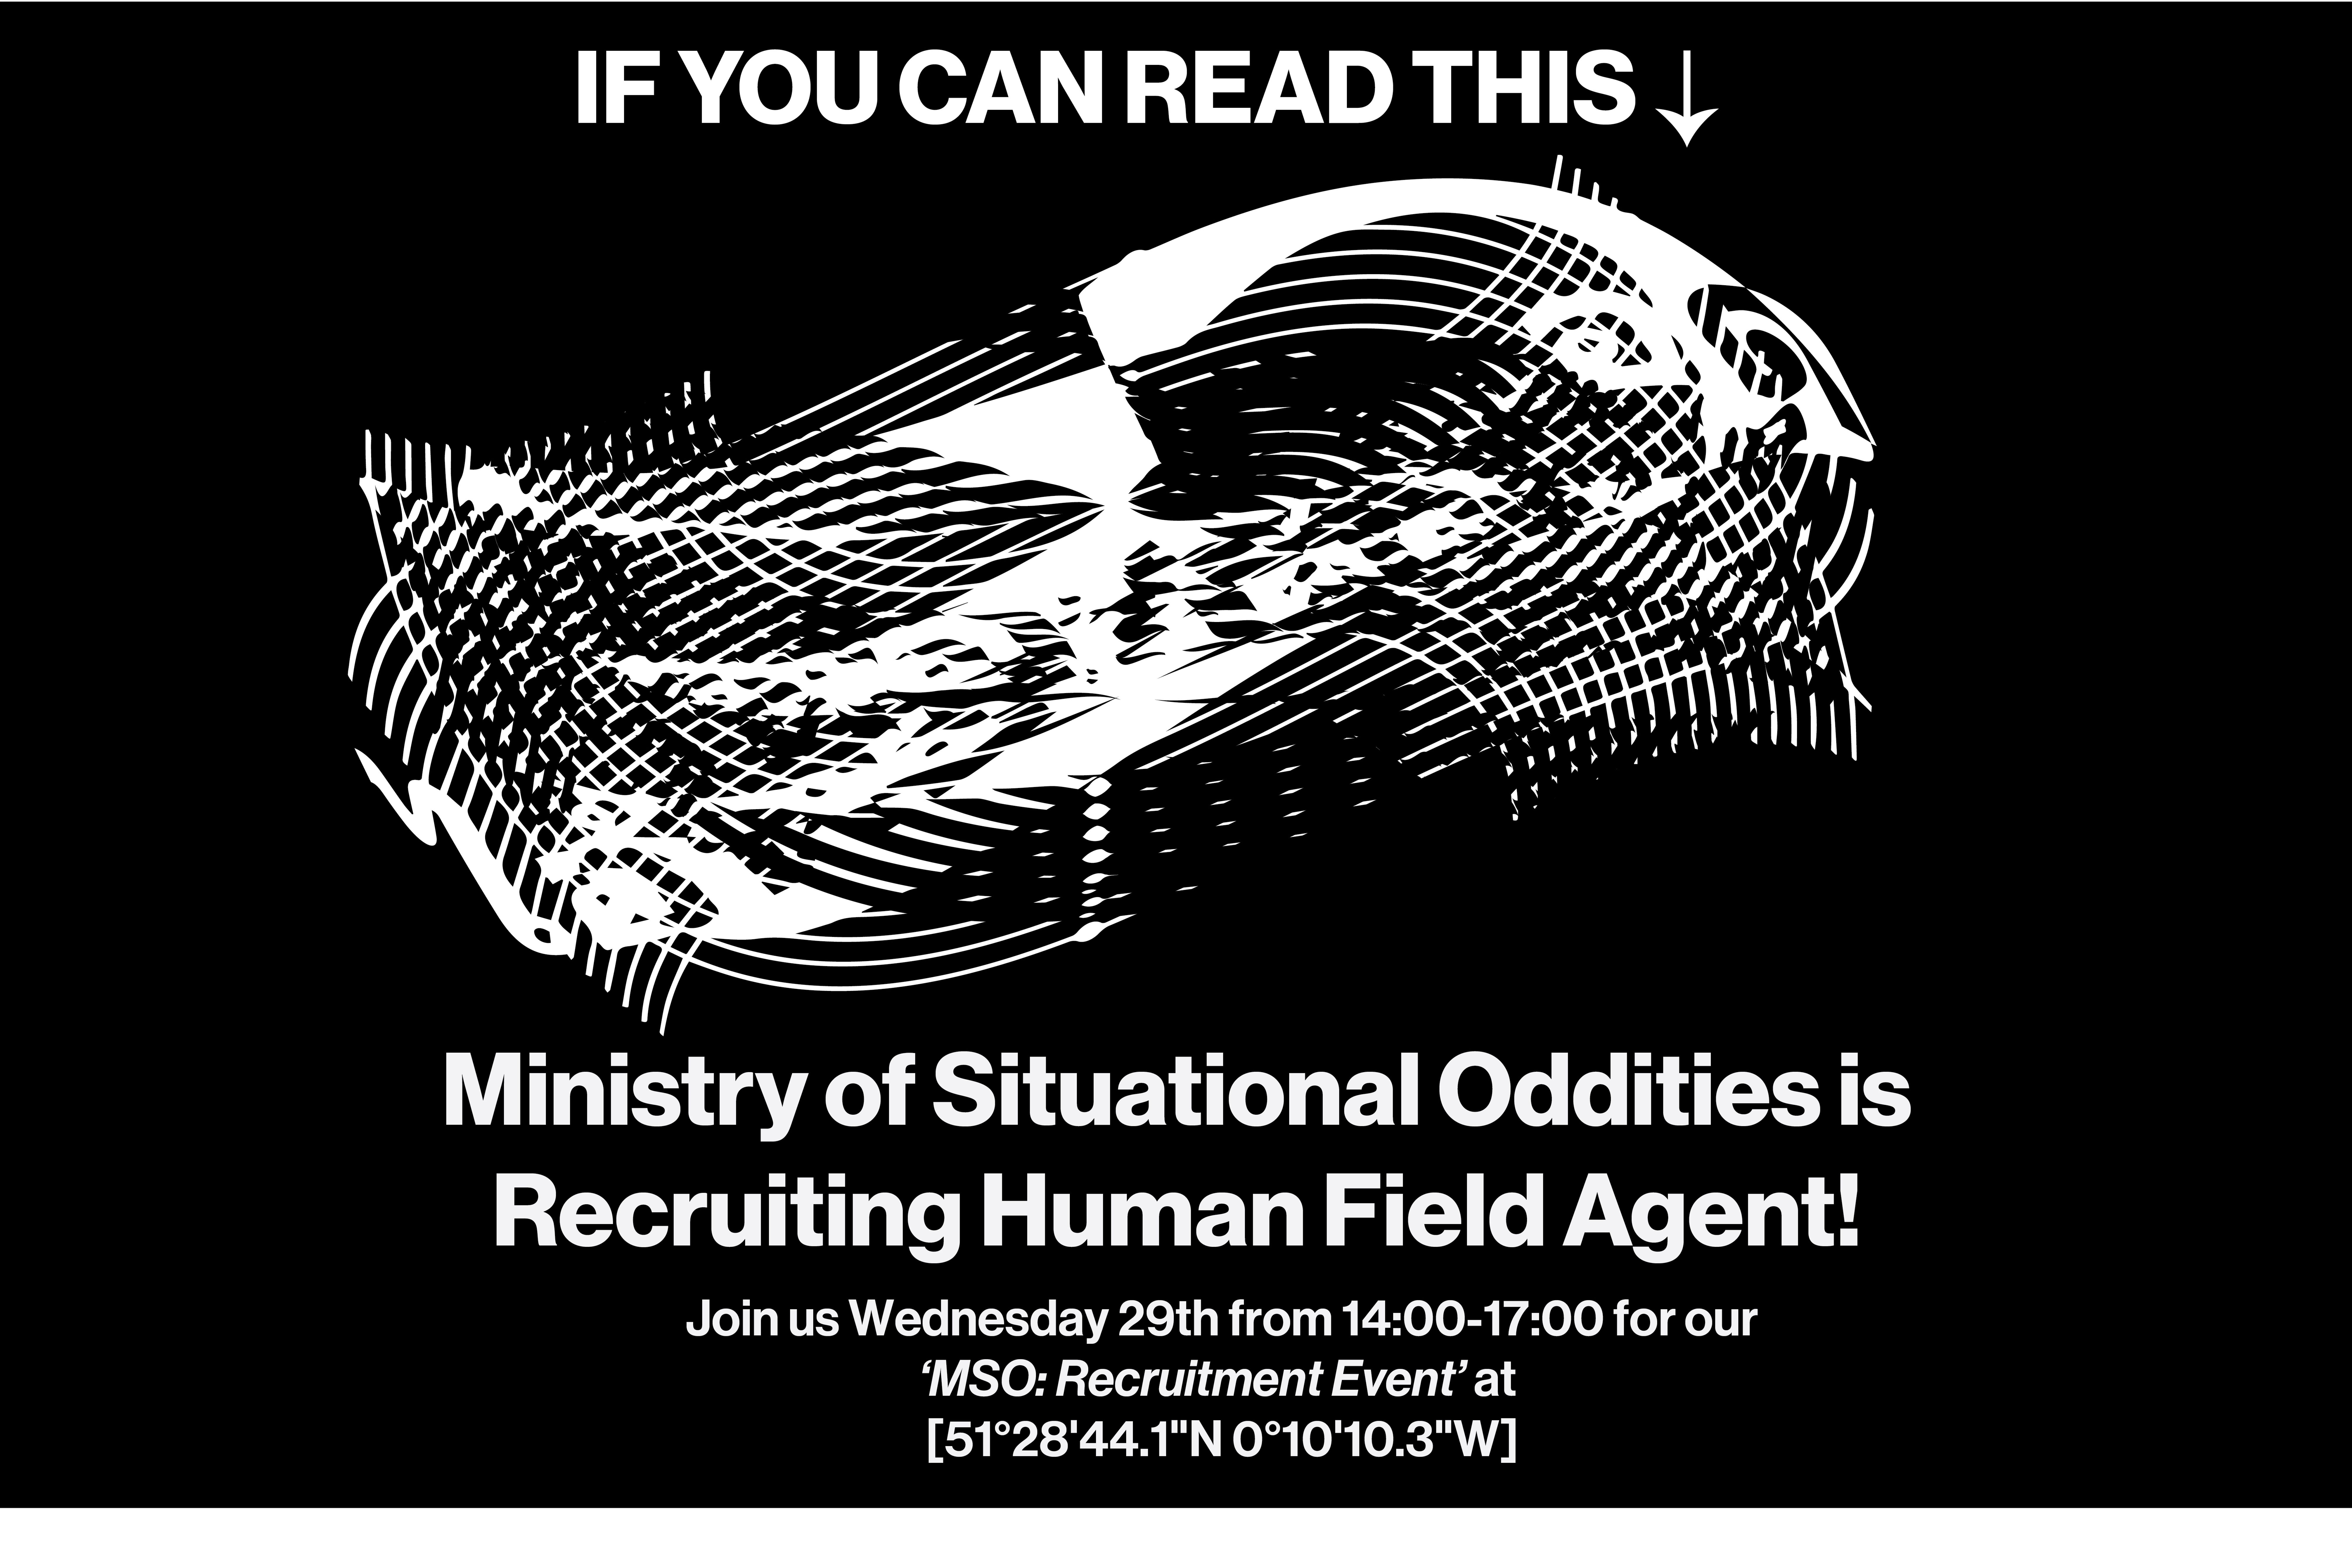 Poster with a white abstract shape on a black background, with white text reading ‘If you can read this. Ministry of Situational Oddities is Recruiting Human Field Agent.’